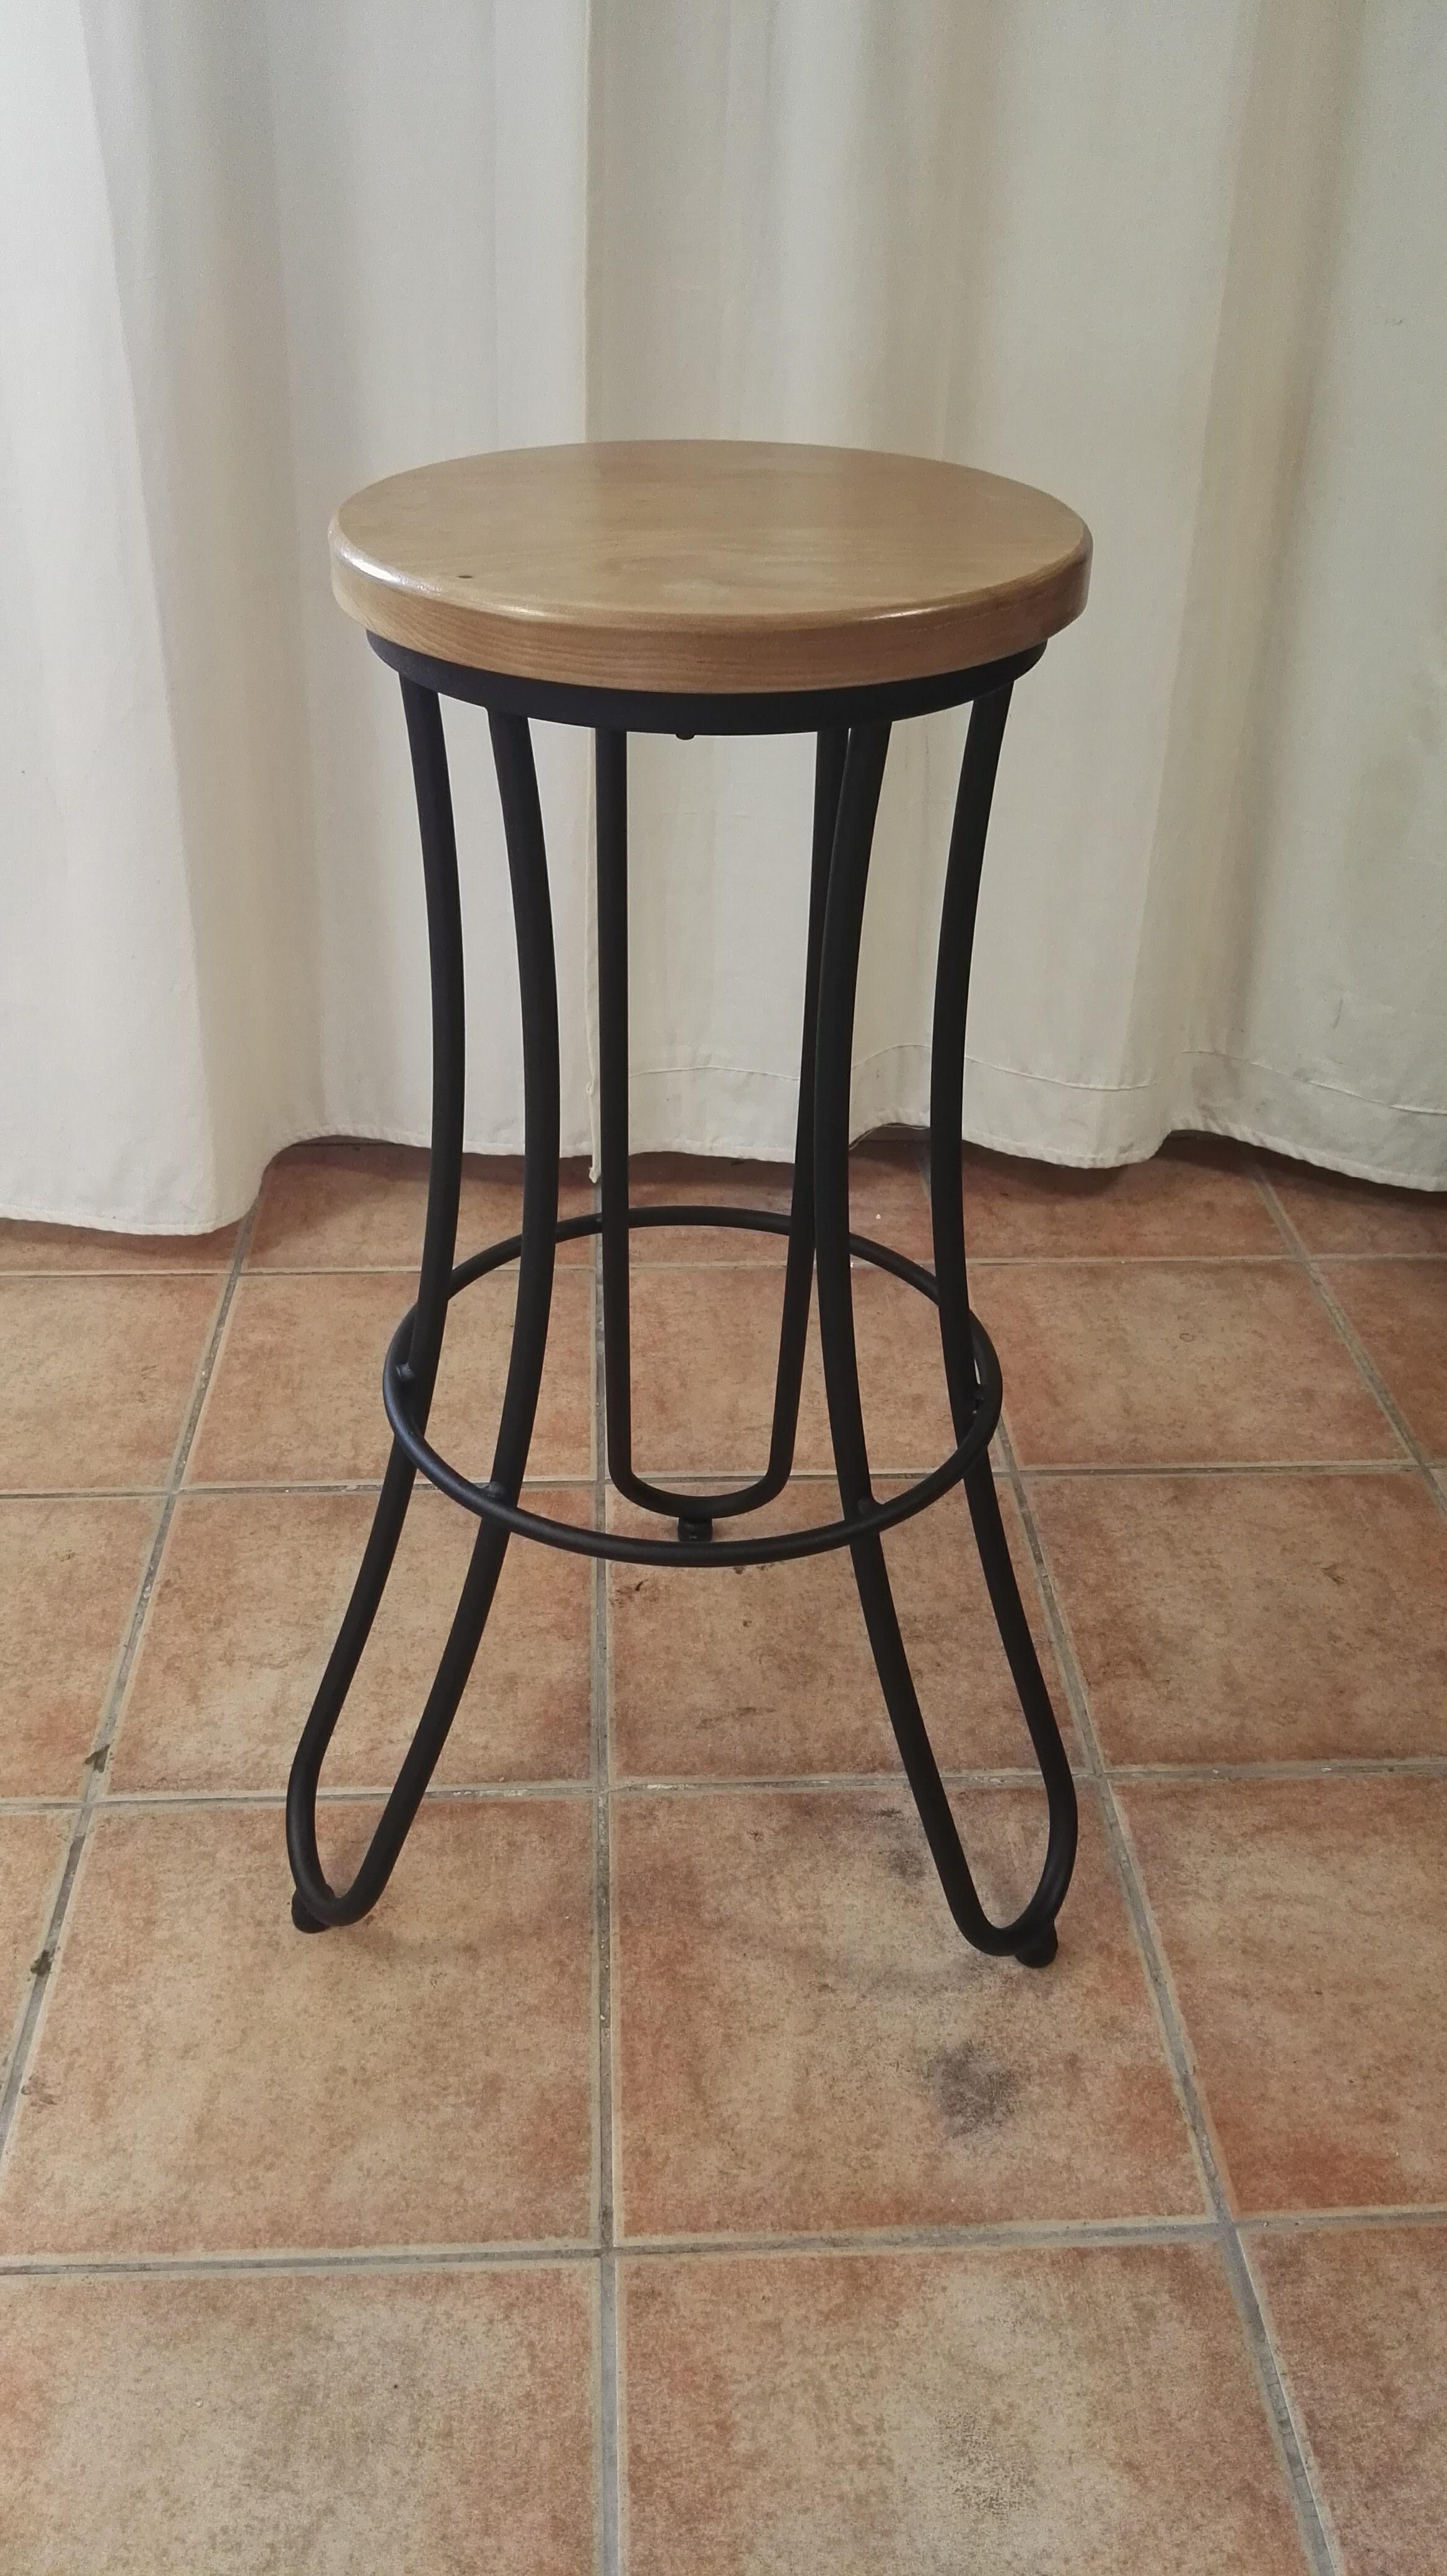 New Industrial Wrought Iron Shop Stool with Oak Seat In Excellent Condition For Sale In Miami, FL